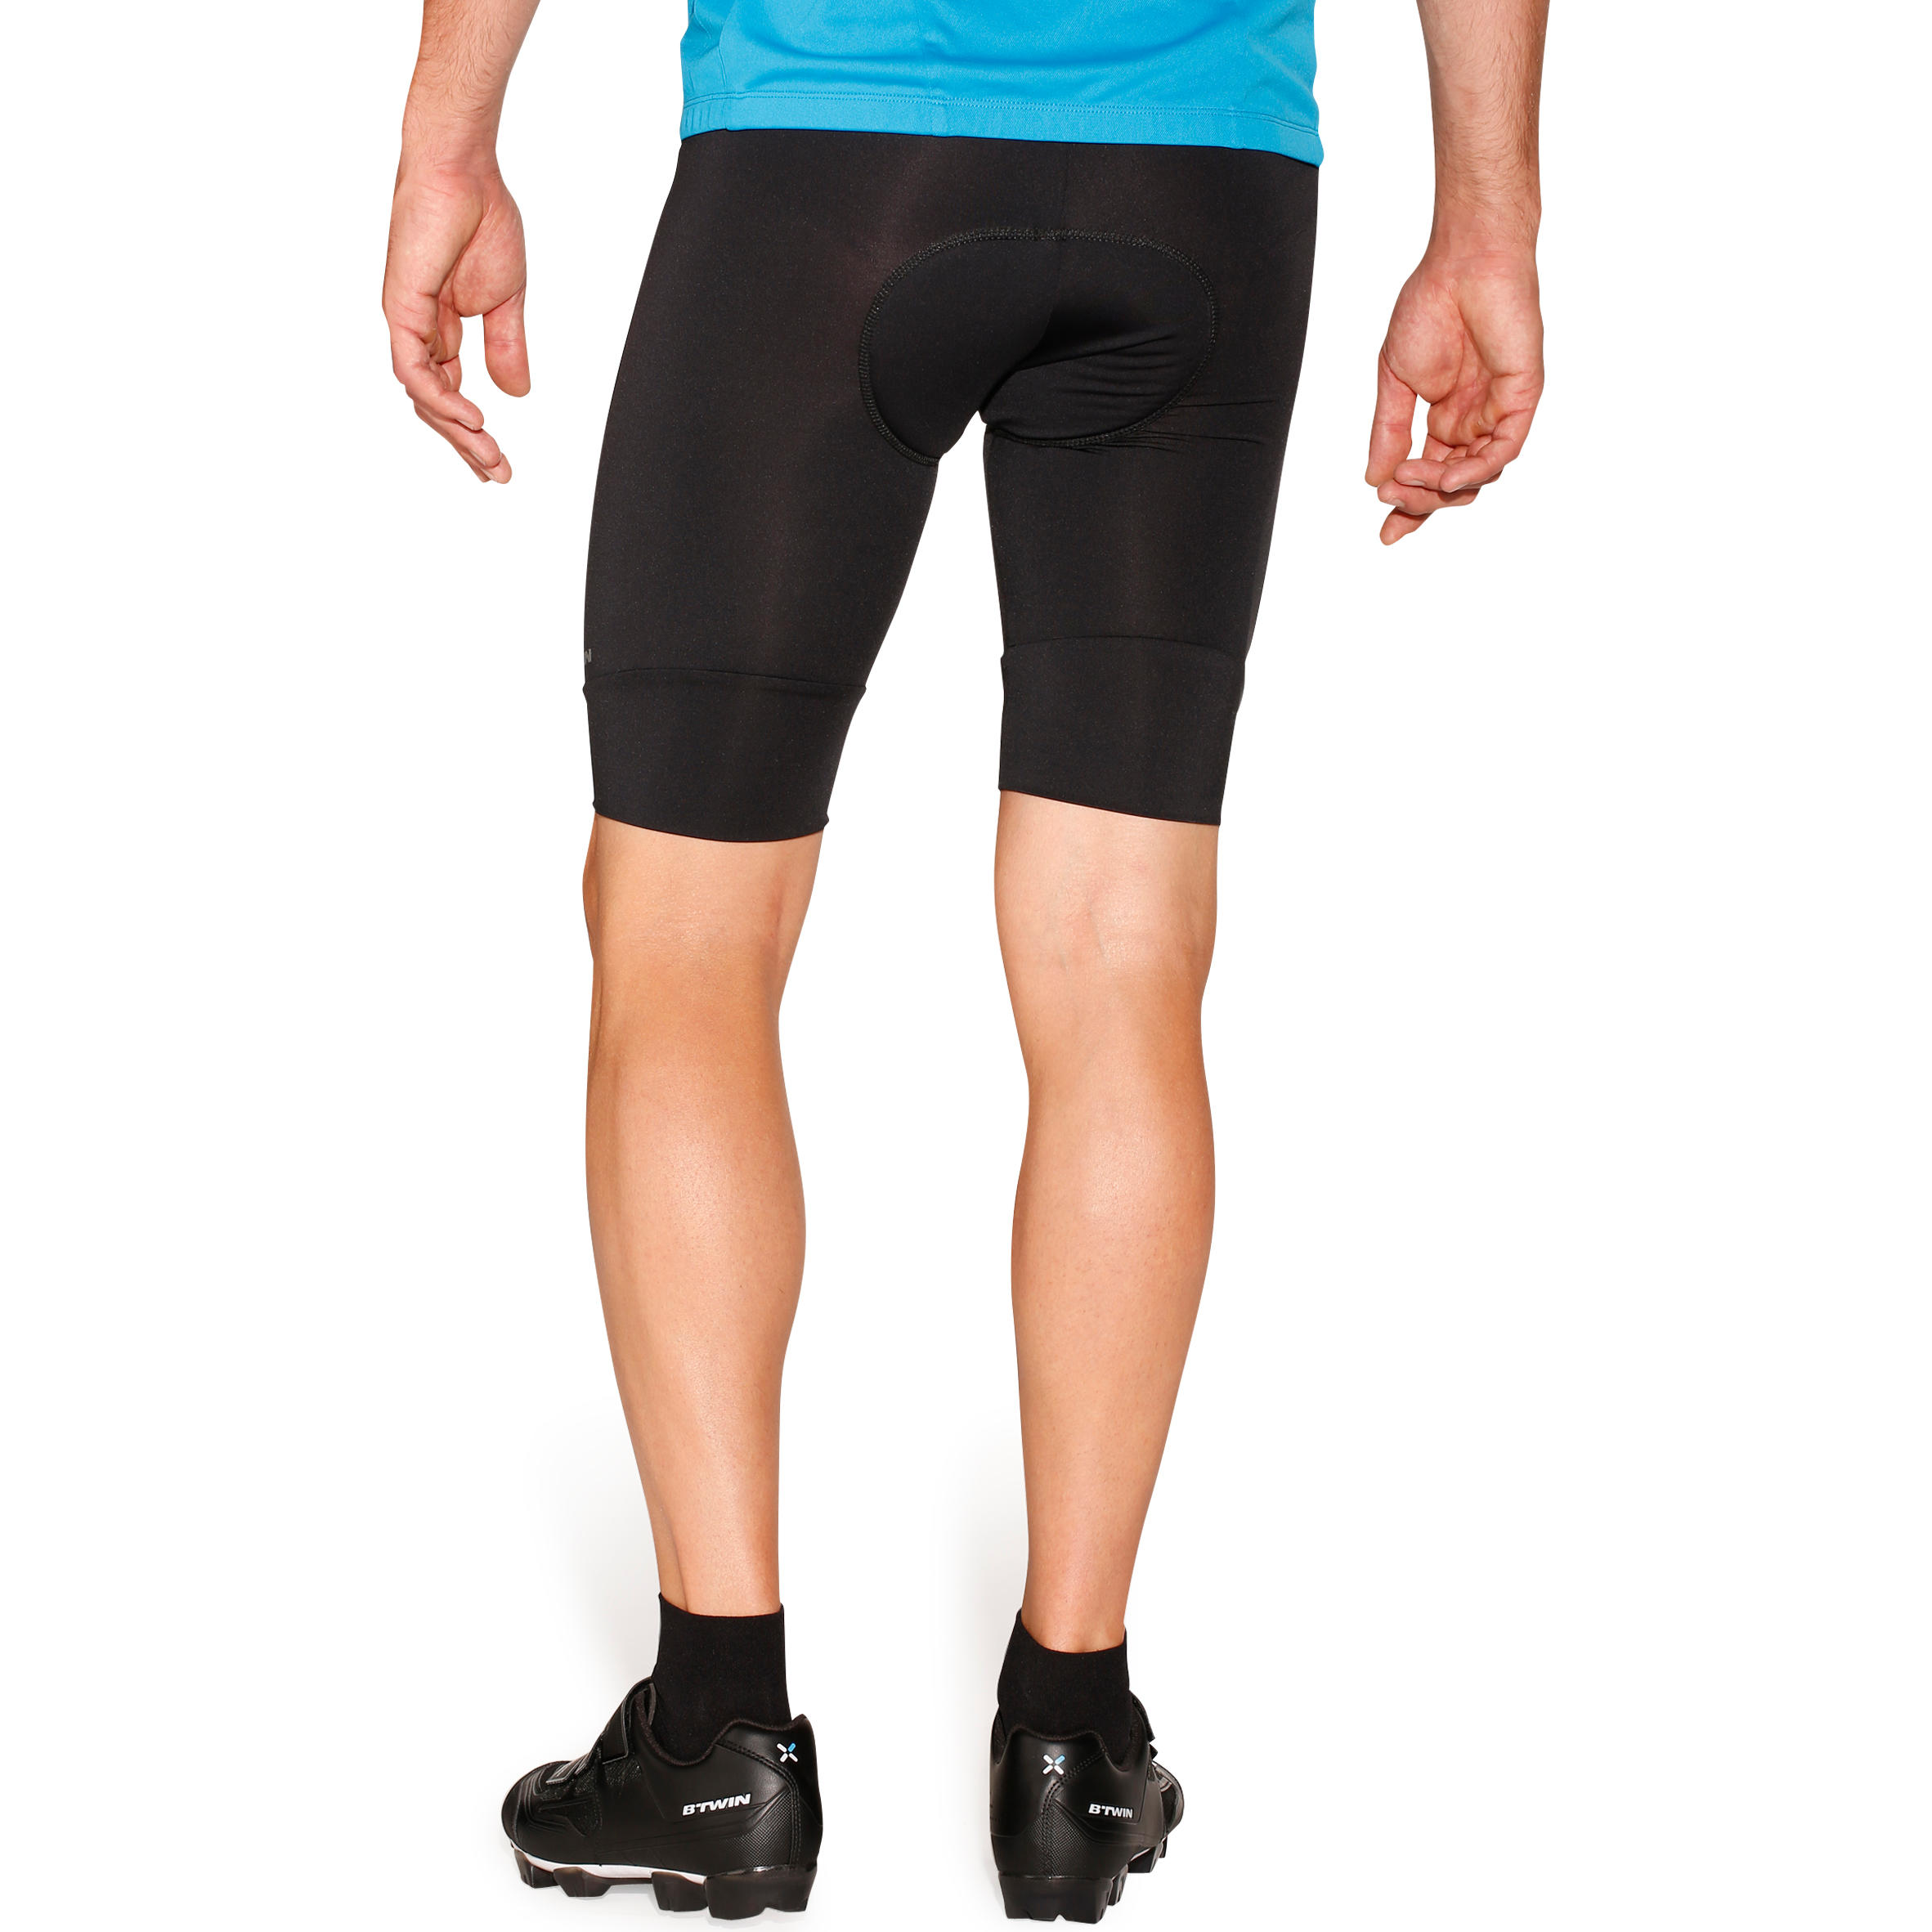 Essential Bibless Road Cycling Shorts - Black 4/11